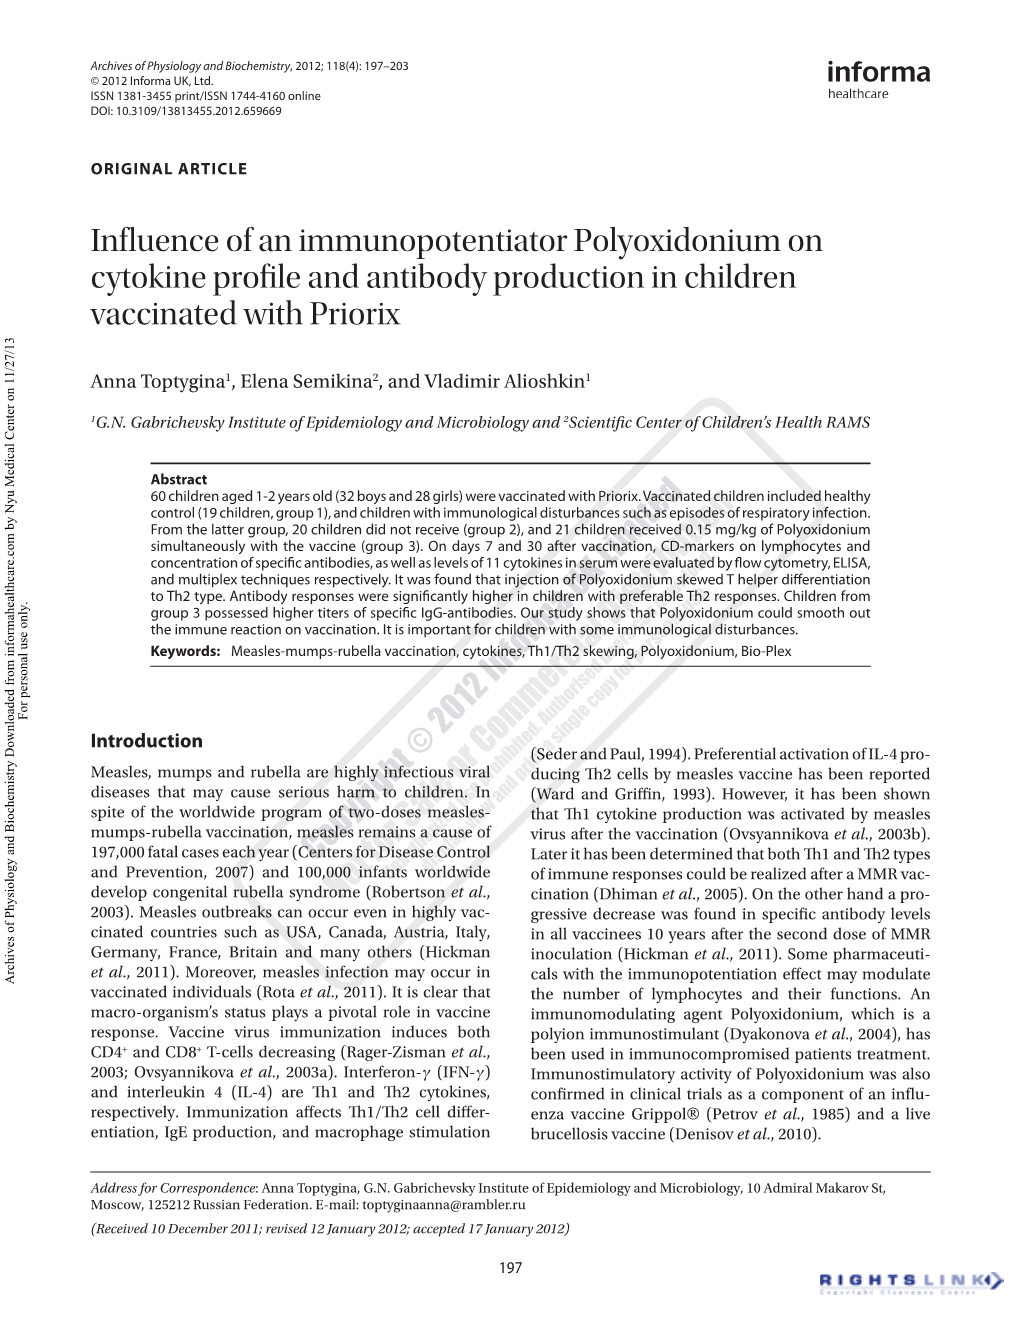 Influence of an Immunopotentiator Polyoxidonium on Cytokine Profile and Antibody Production in Children Vaccinated with Priorix